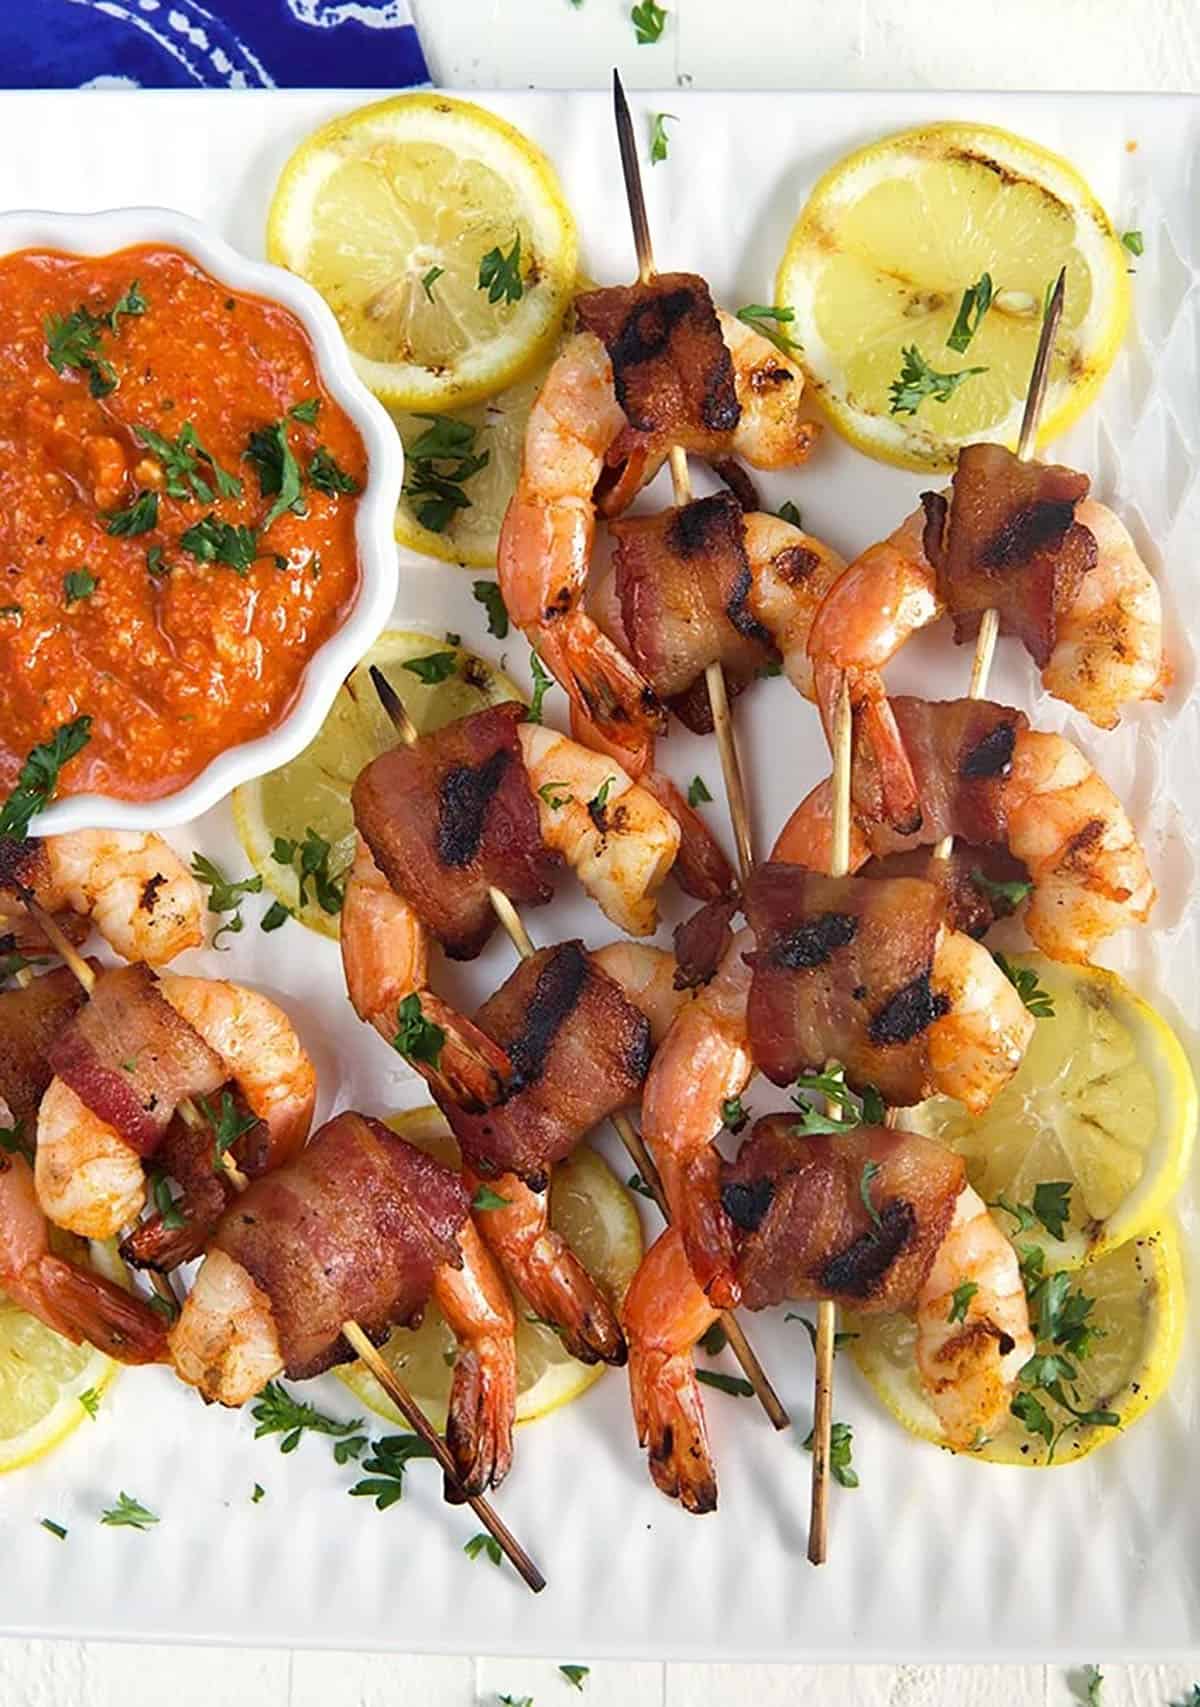 Overhead view of bacon wrapped shrimp on bamboo skewers on a white platter with red romesco sauce in a white bowl.